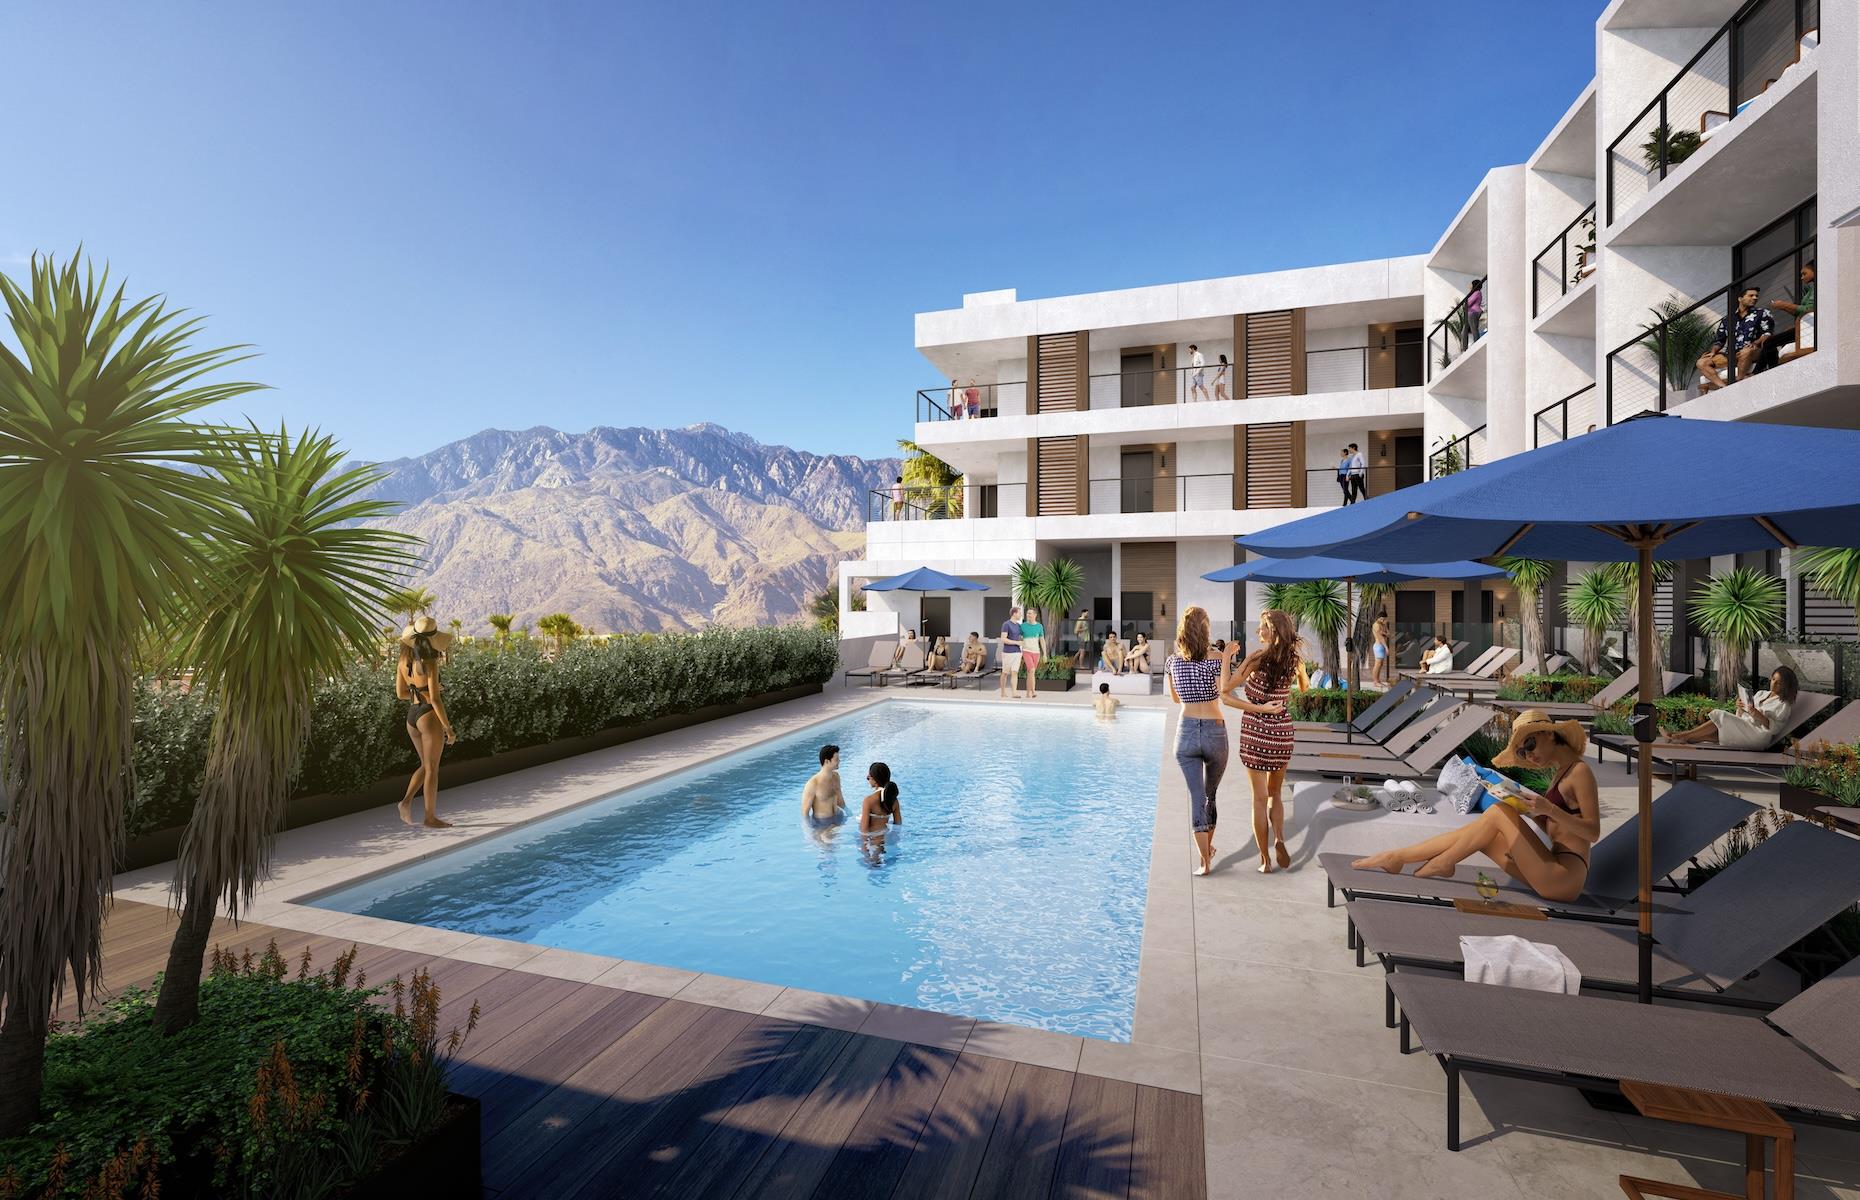 <p>Palm Springs isn’t short of chic places to stay and its style credentials continue to grow as Thompson Hotels opens its second Californian property this May in the desert enclave’s downtown Design District. The brand’s signature sleek decor will be complemented with earthy hues and vivid pops of colour with an overarching Rat Pack-era style vision. It’s a biggie, with 168 "bungalow-inspired" rooms and suites, 35,000 square feet (3251sqm) of dining and retail space (including a vast Napa Valley wine tasting room), a gym, ballroom and spa. Balconies and a pool area will offer the classic Palm Spring views of the San Jacinto Mountains to pose by.</p>